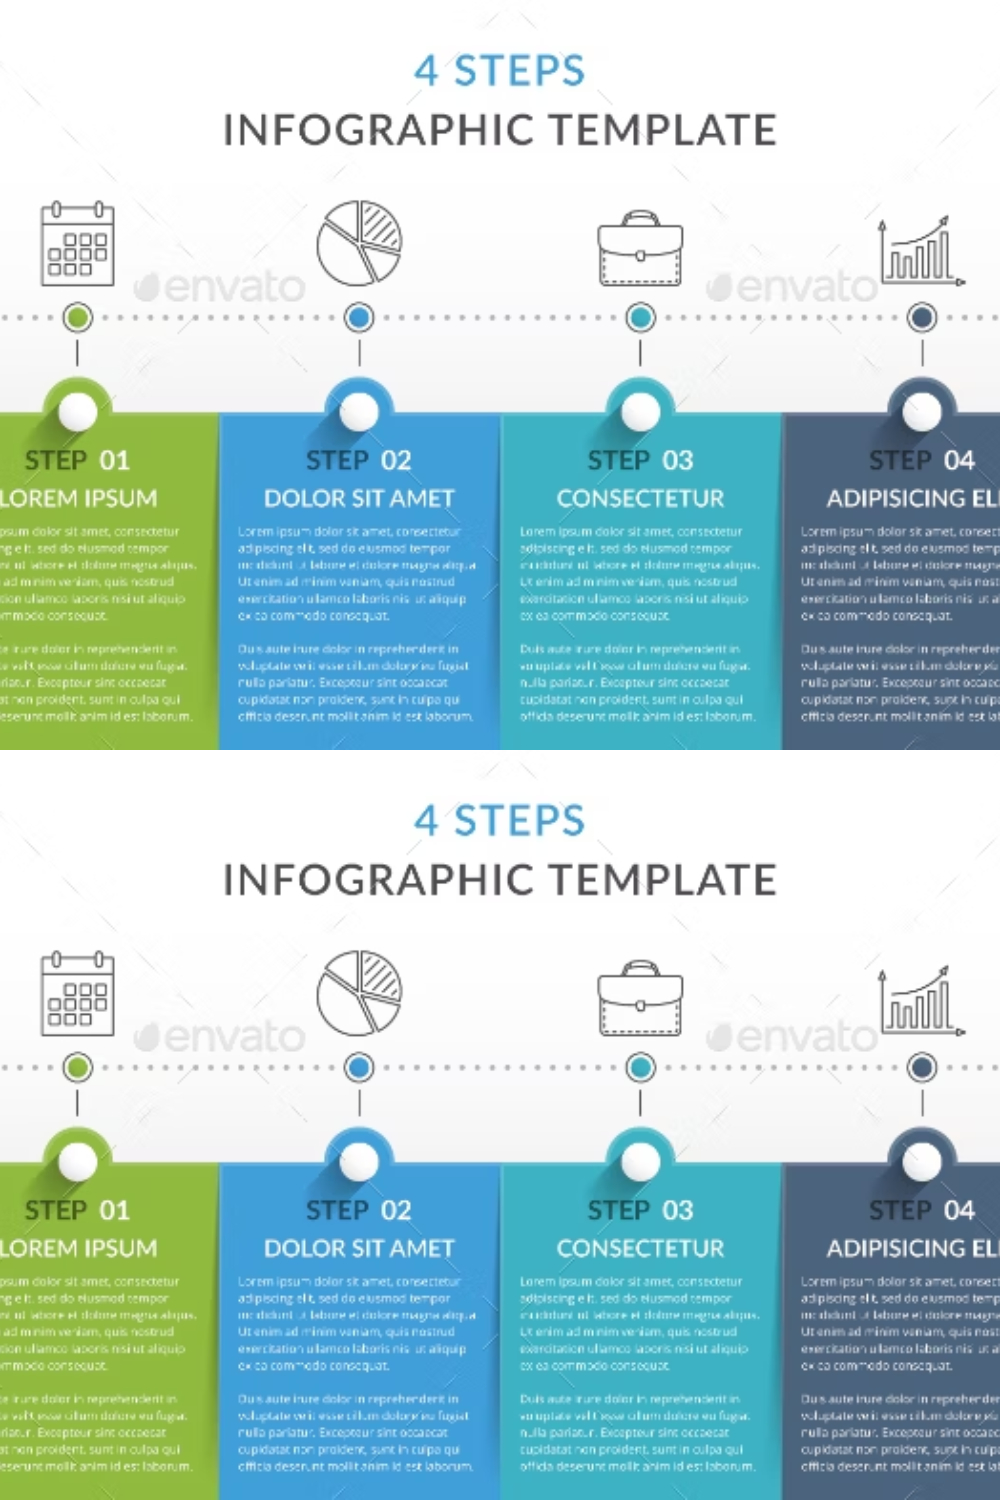 4 Steps - Infographic Template Pinterest Cover.